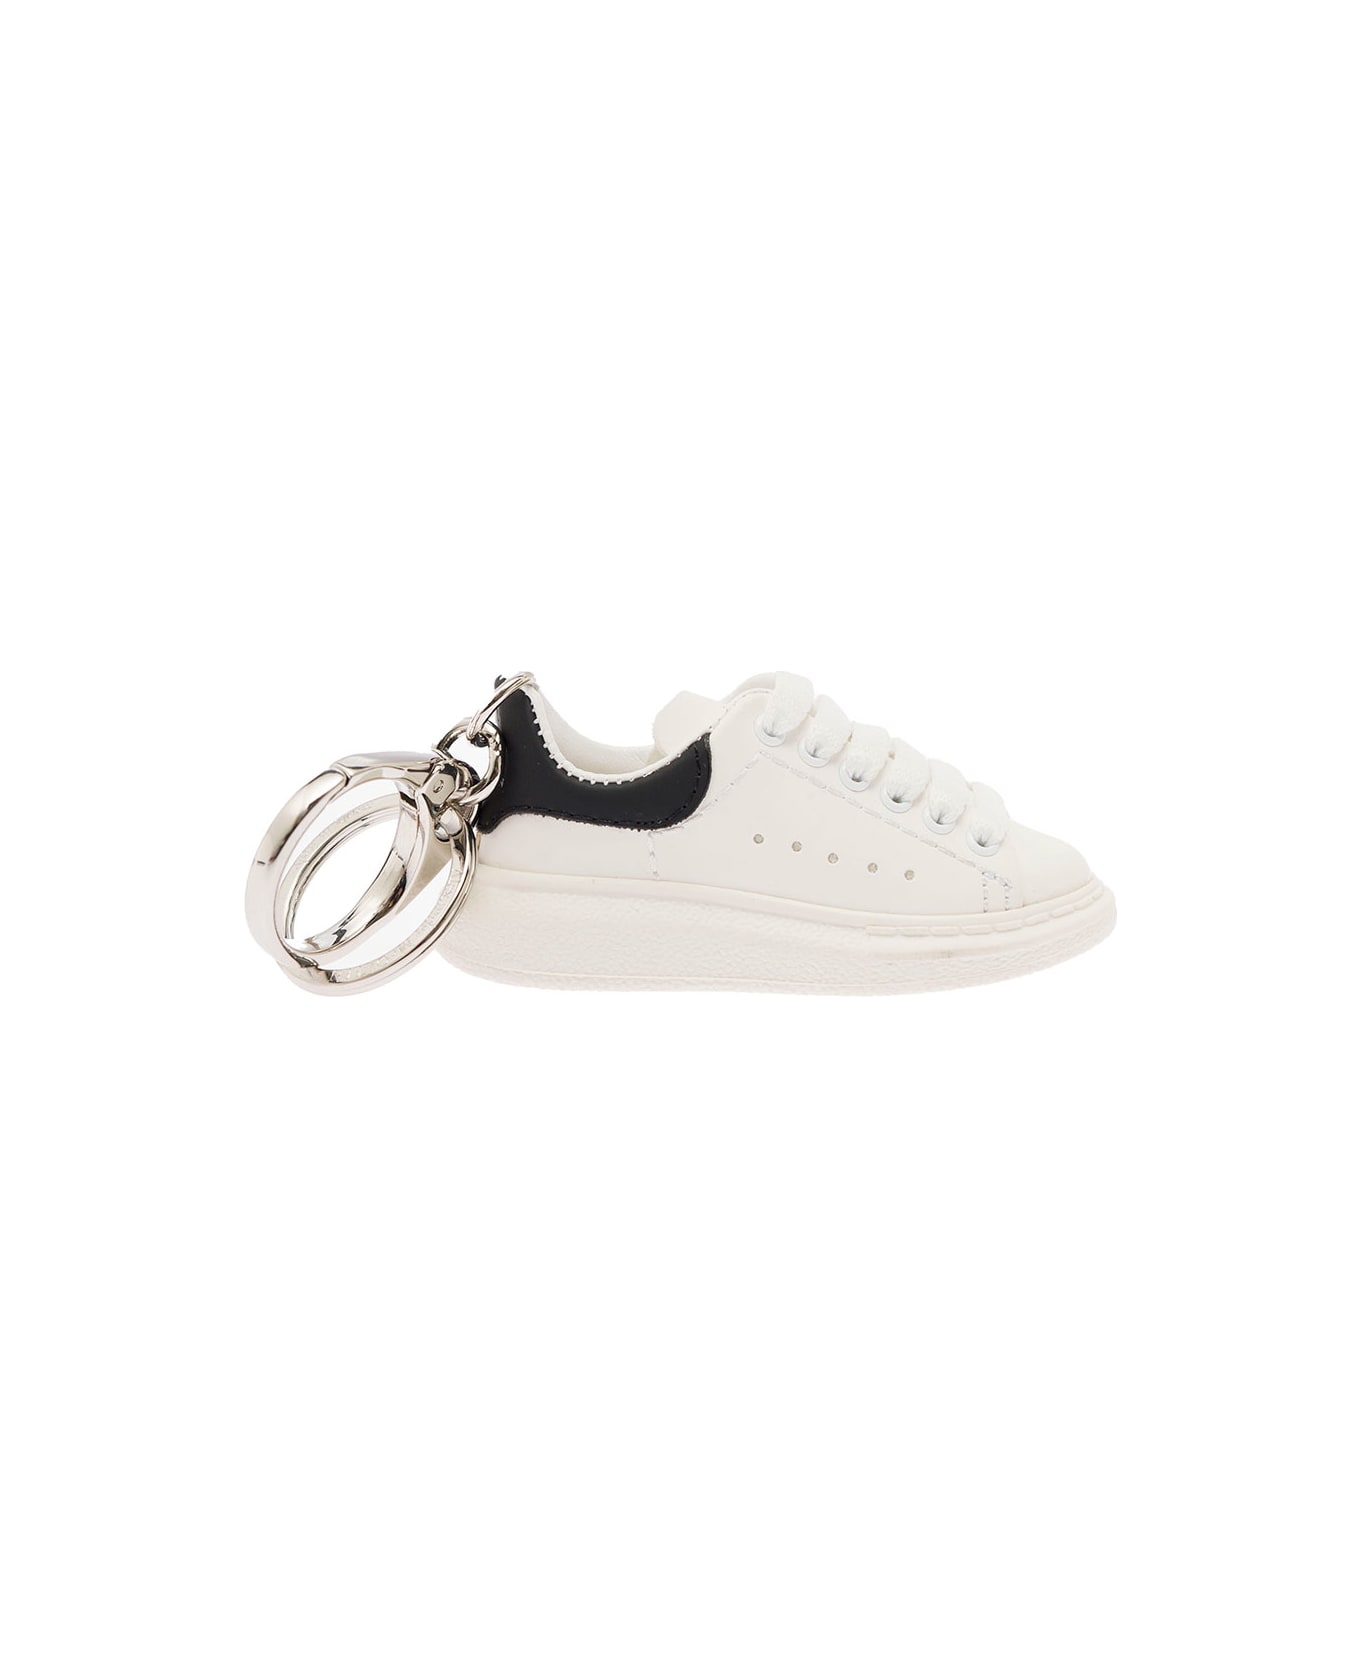 Alexander McQueen White And Silver Chunky Sole Sneaker style Keyring - White